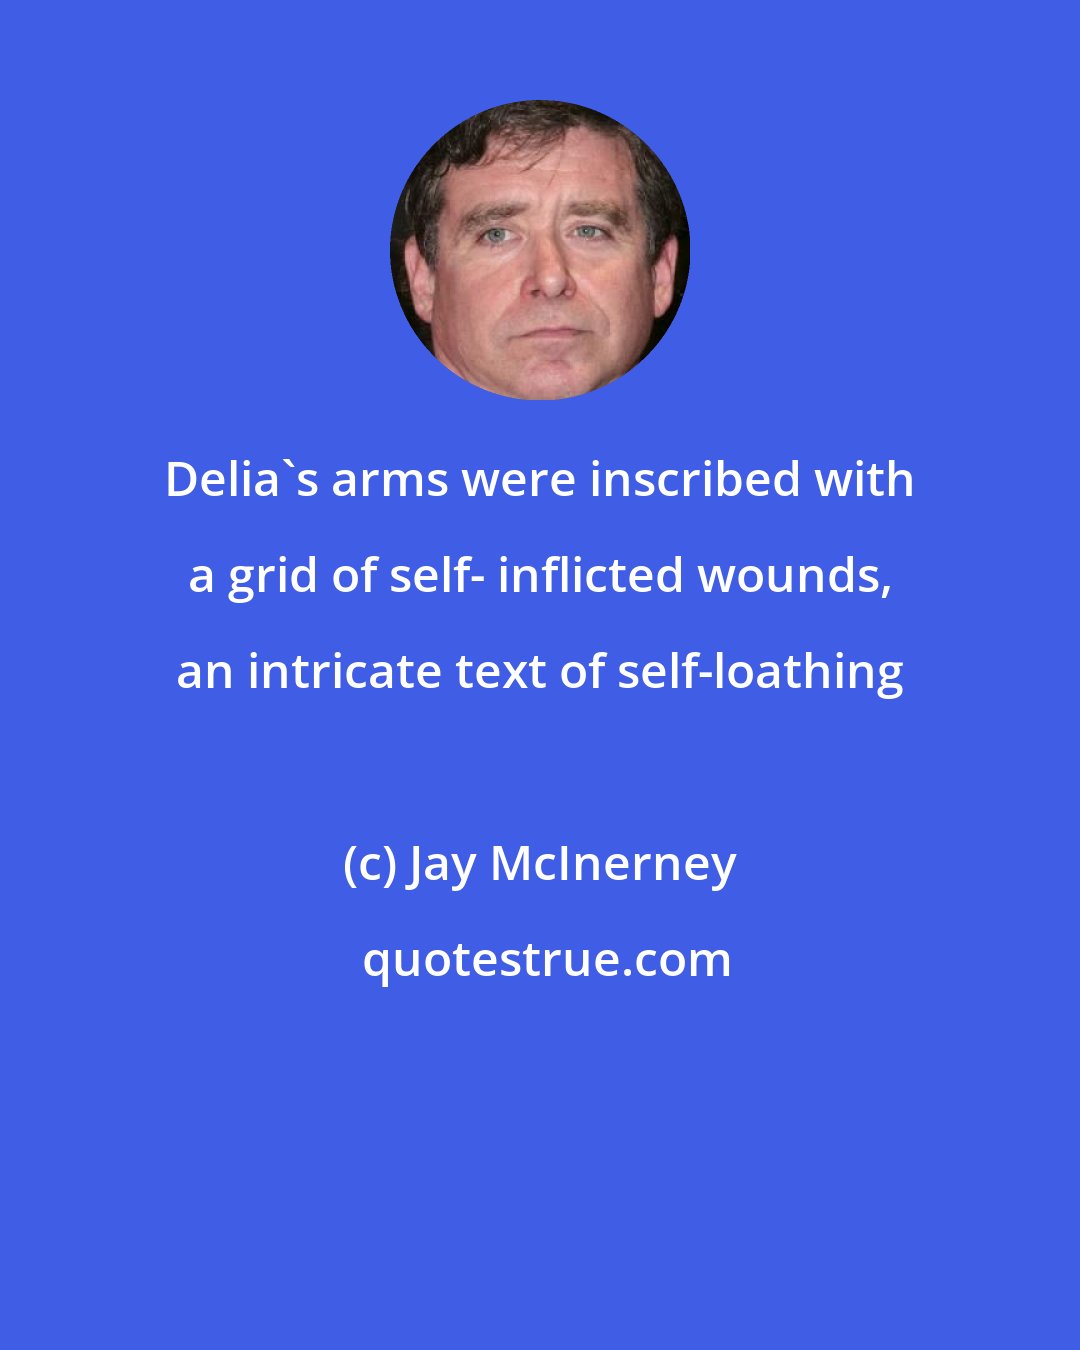 Jay McInerney: Delia's arms were inscribed with a grid of self- inflicted wounds, an intricate text of self-loathing